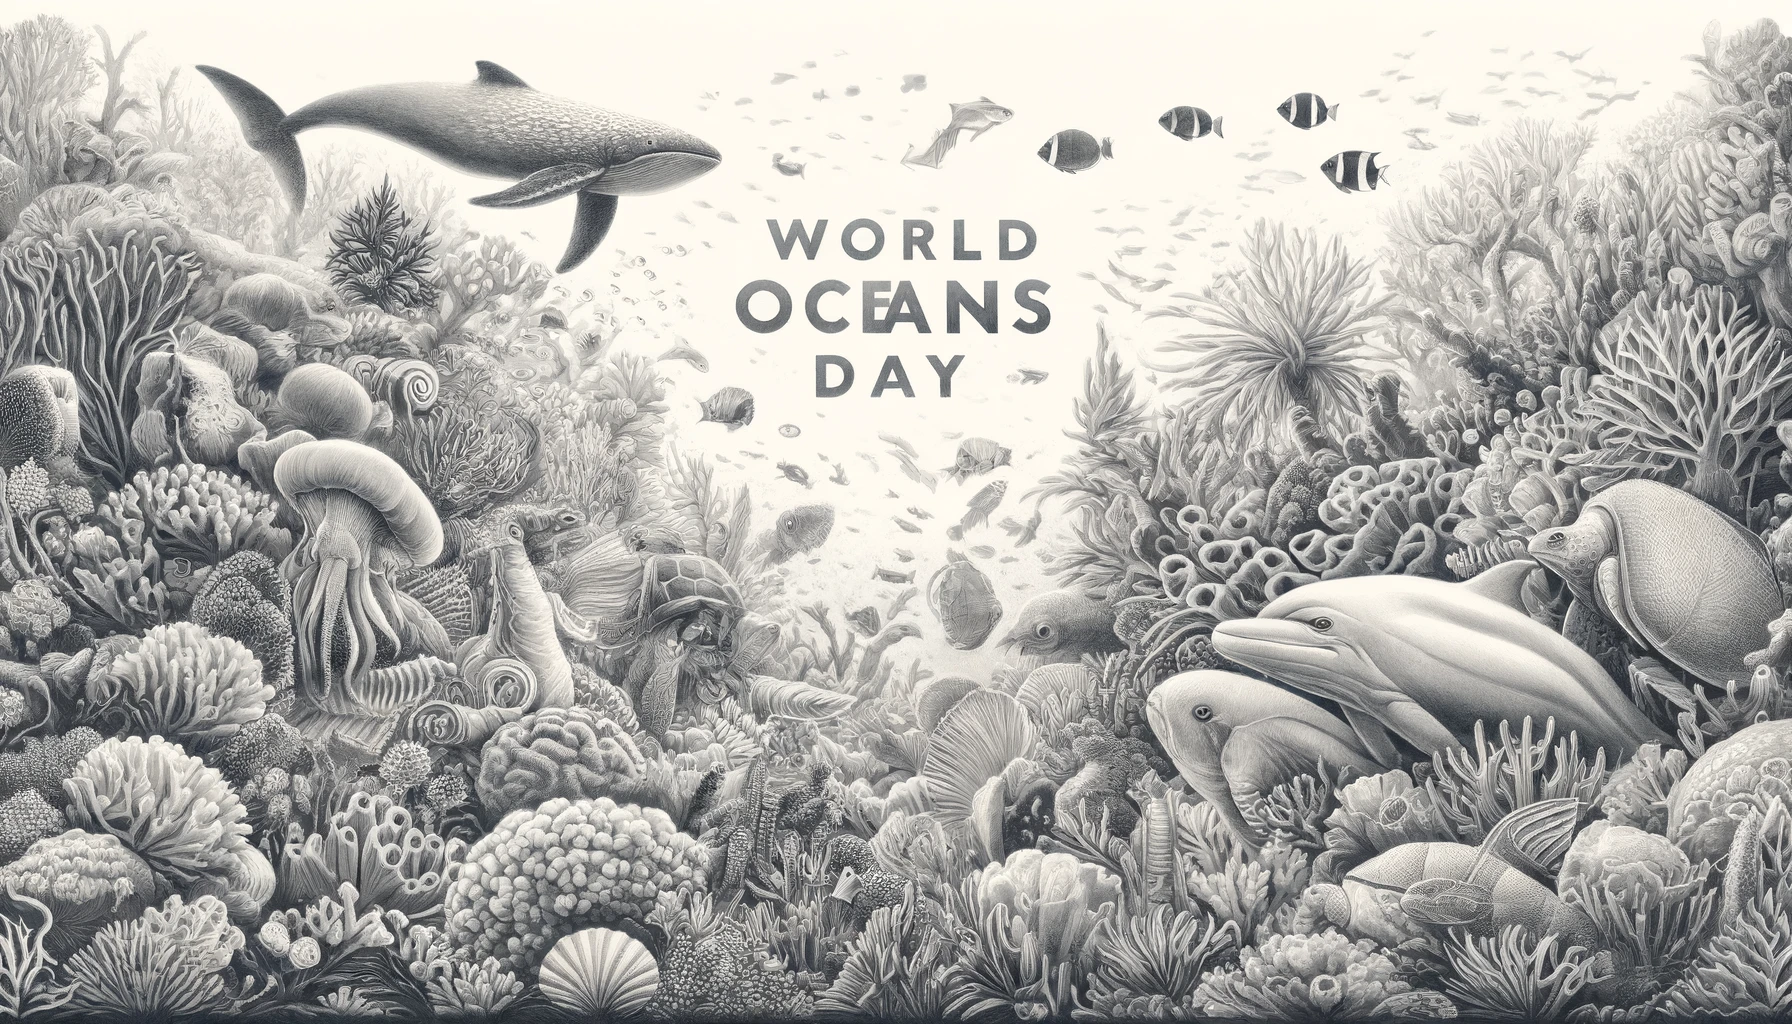 Messages of Hope and Action for World Oceans Day